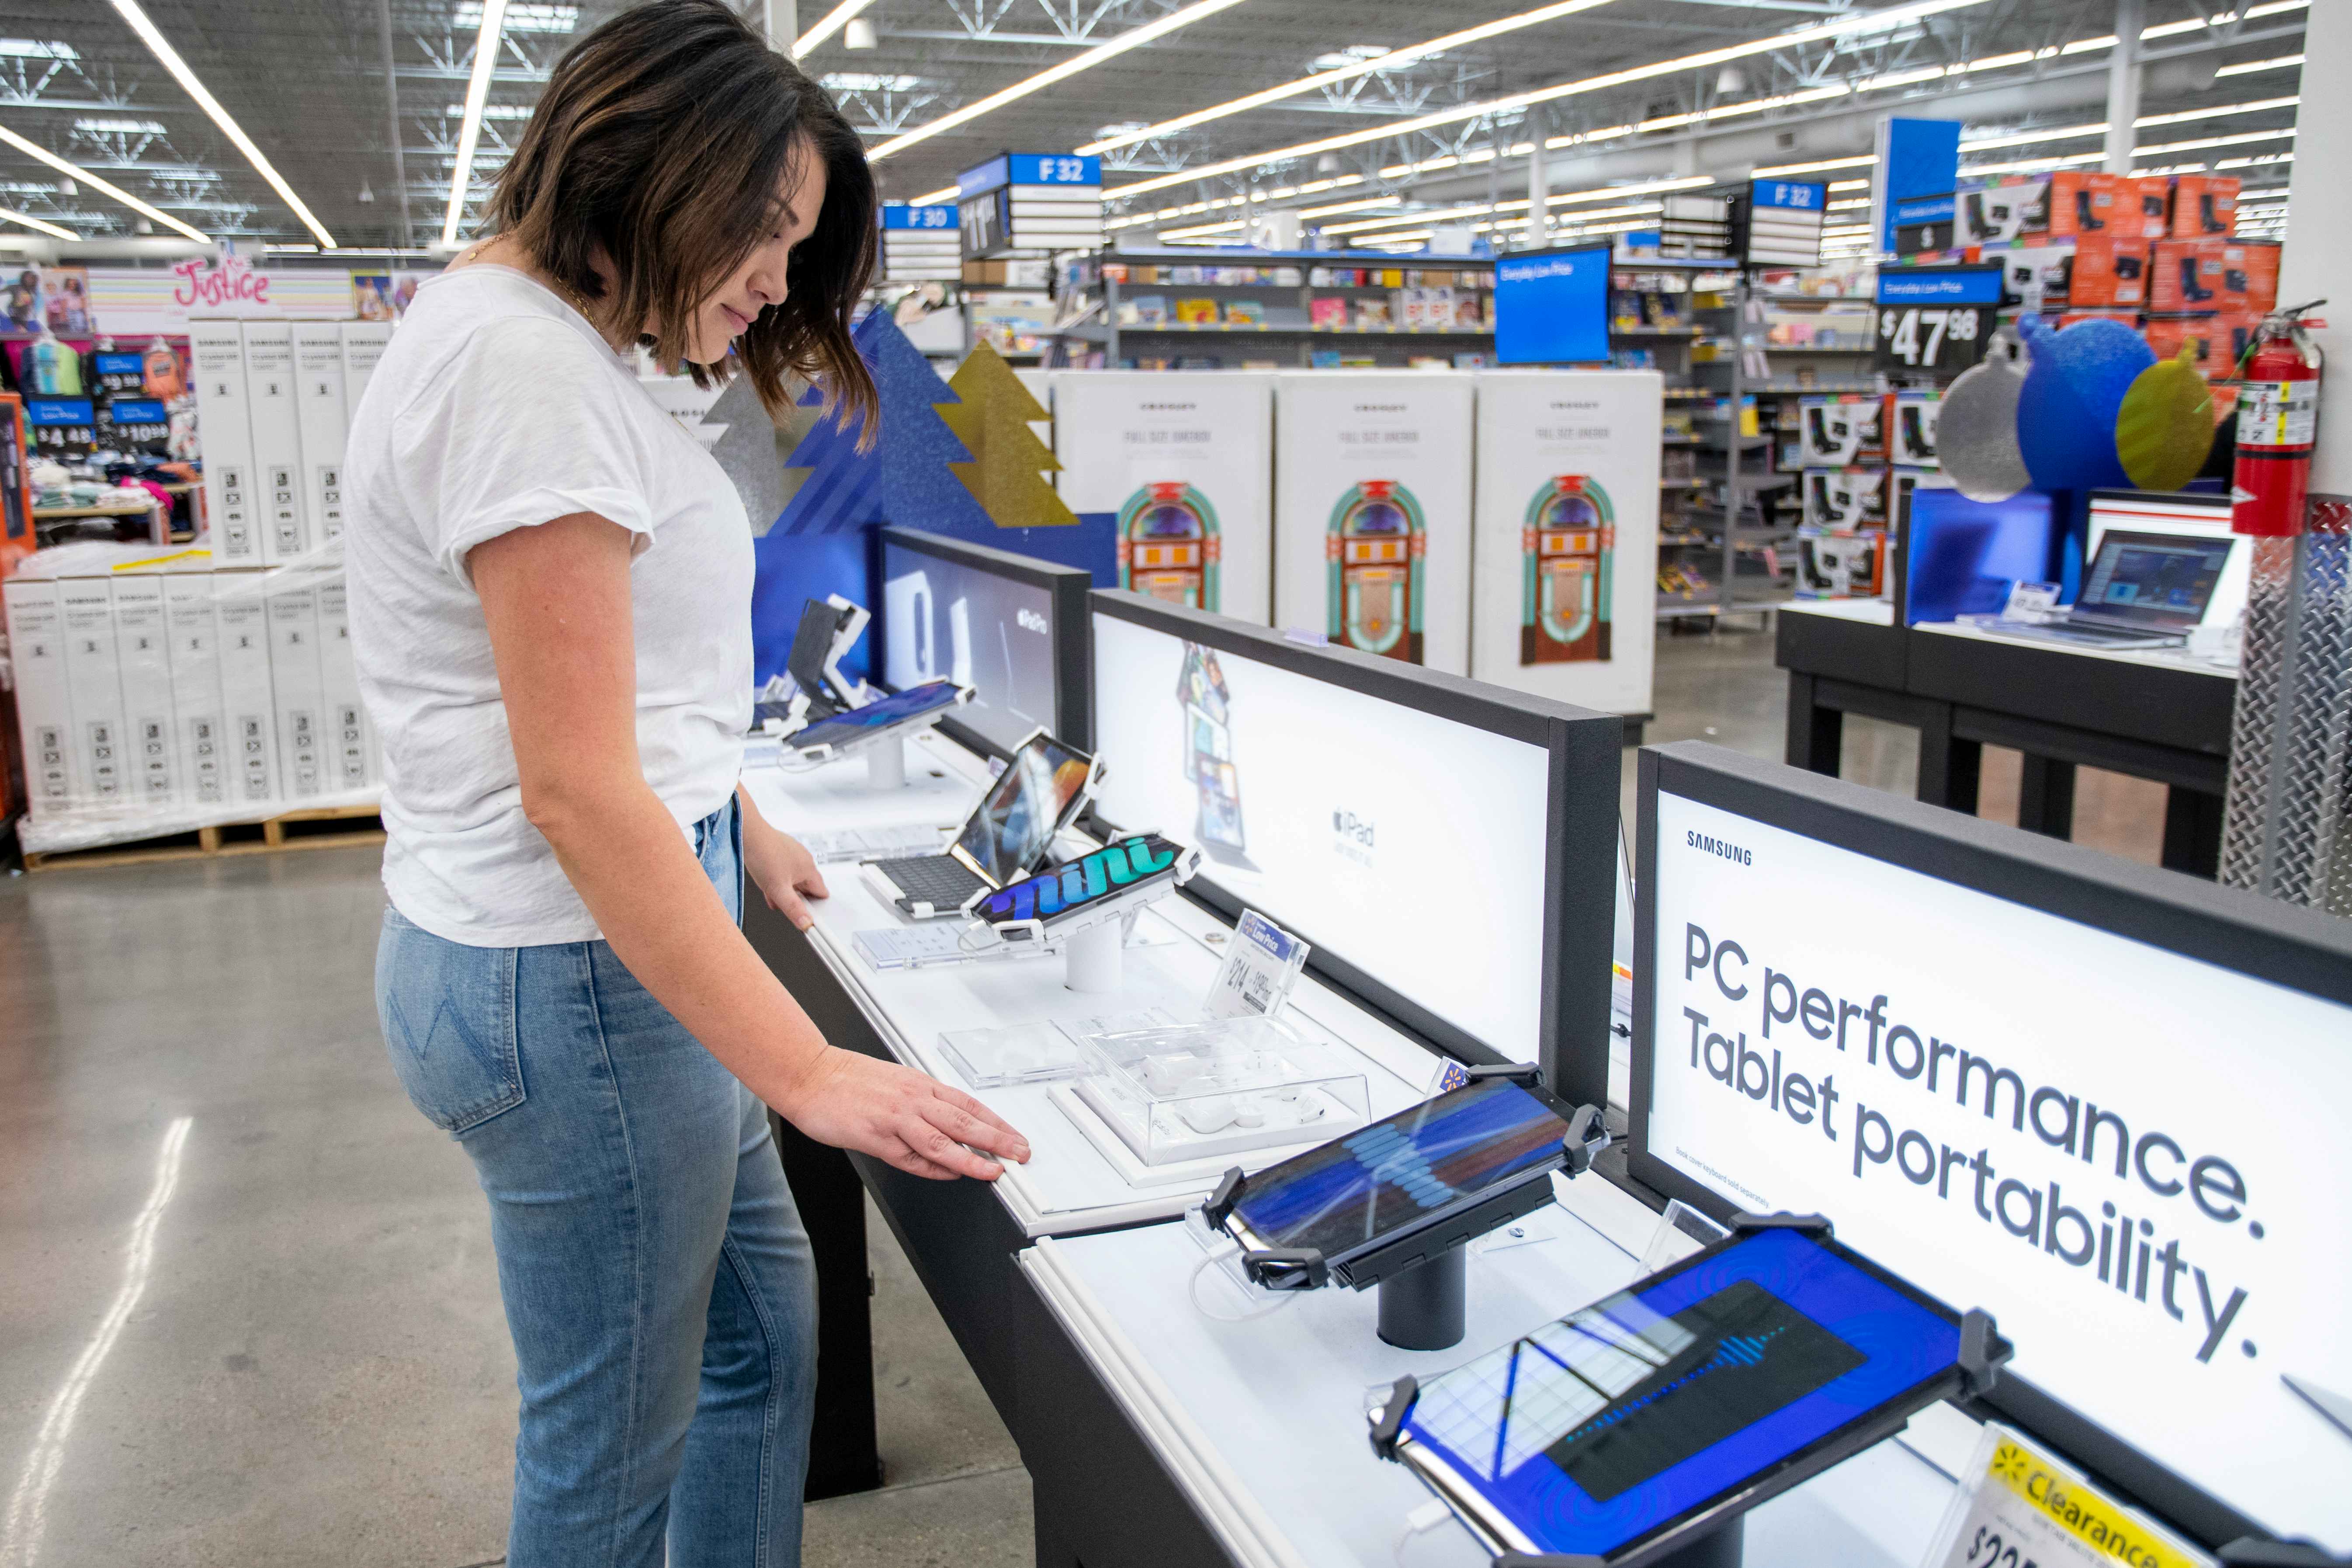 A woman looking at Samsung tablets in Walmart's electronics department